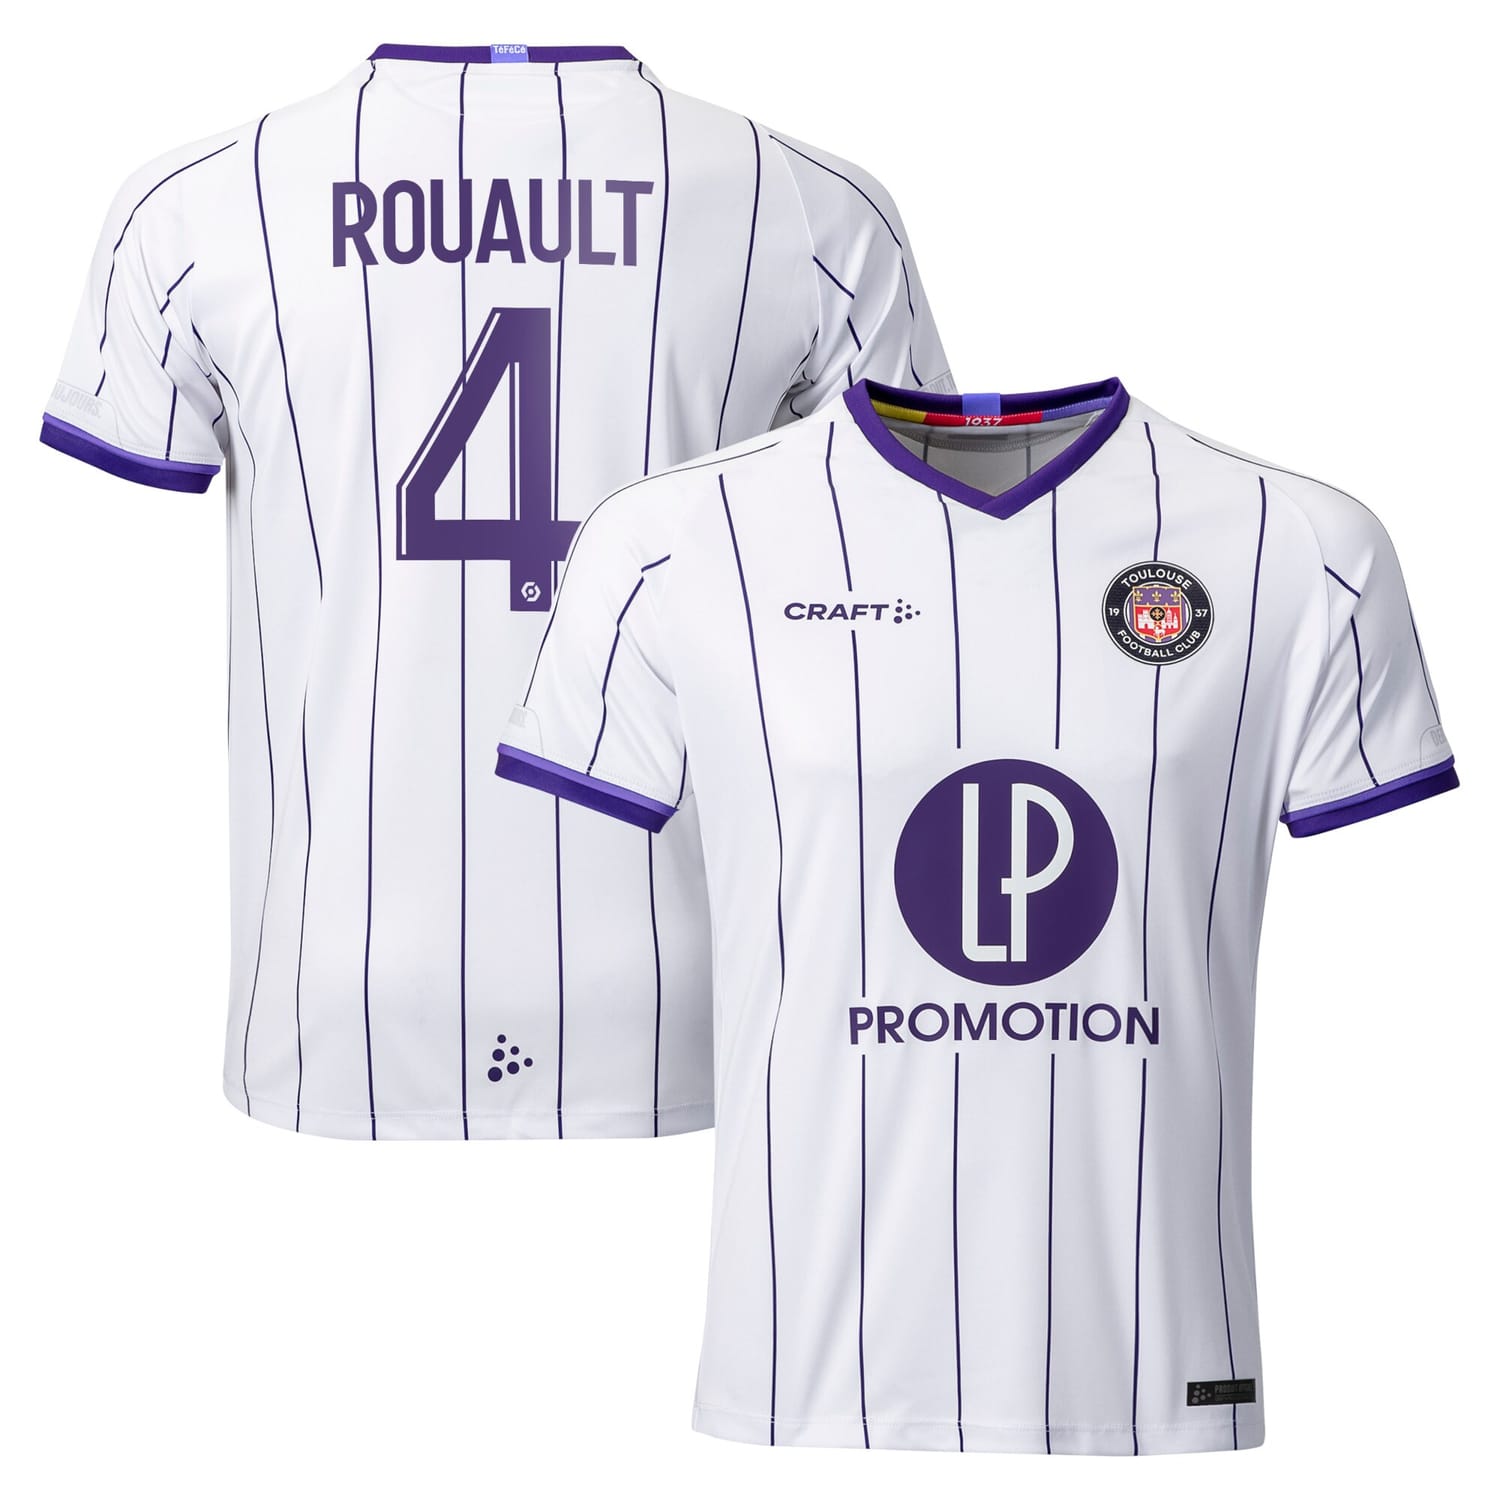 Ligue 1 Toulouse Home Jersey Shirt 2022-23 player Anthony Rouault 4 printing for Men